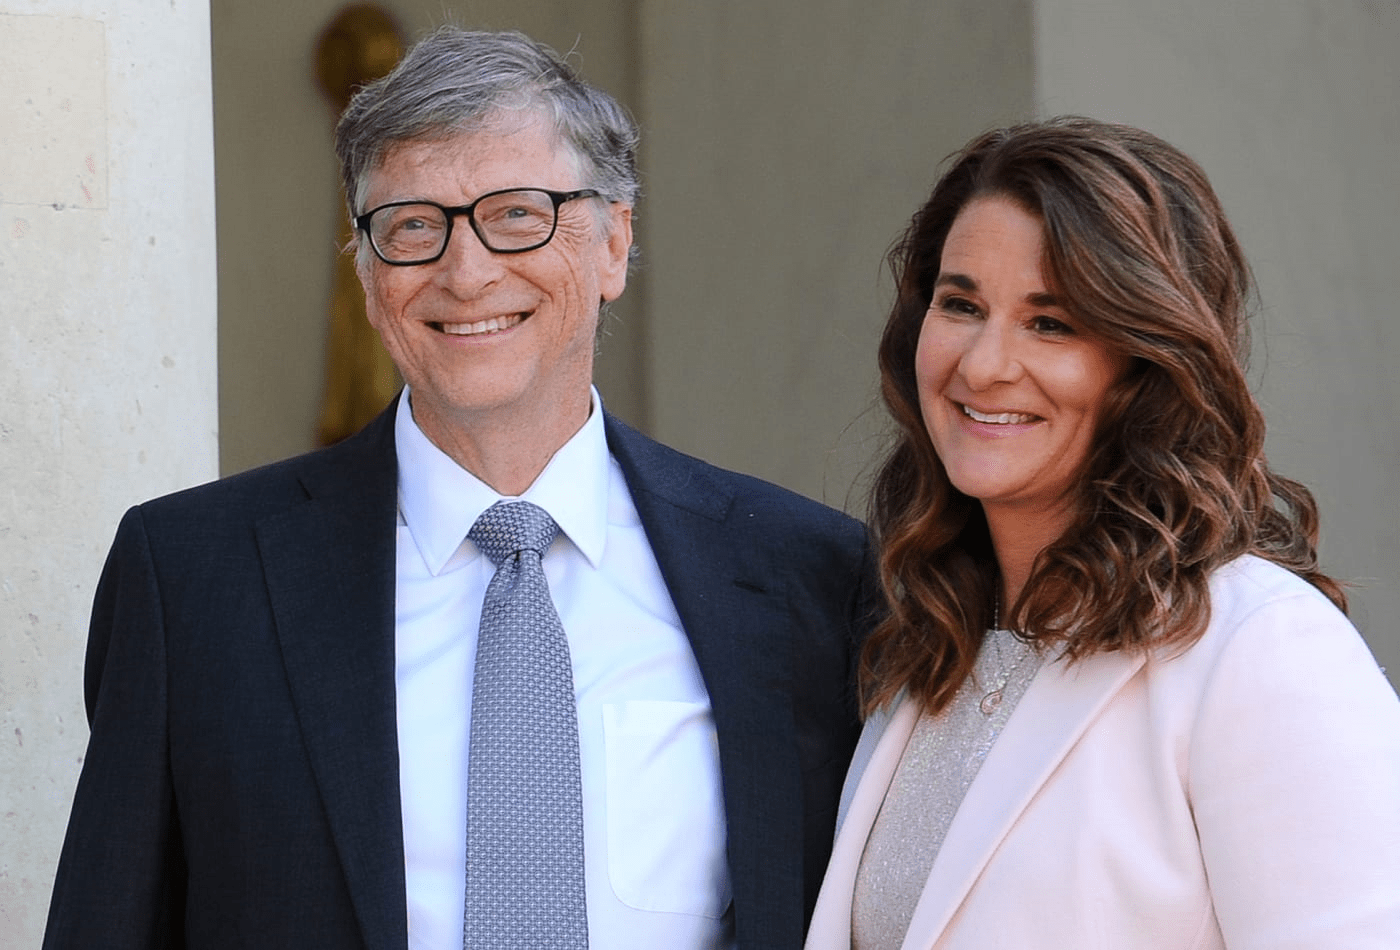 Bill Gates and Melinda Gates decided to split up after 27 years